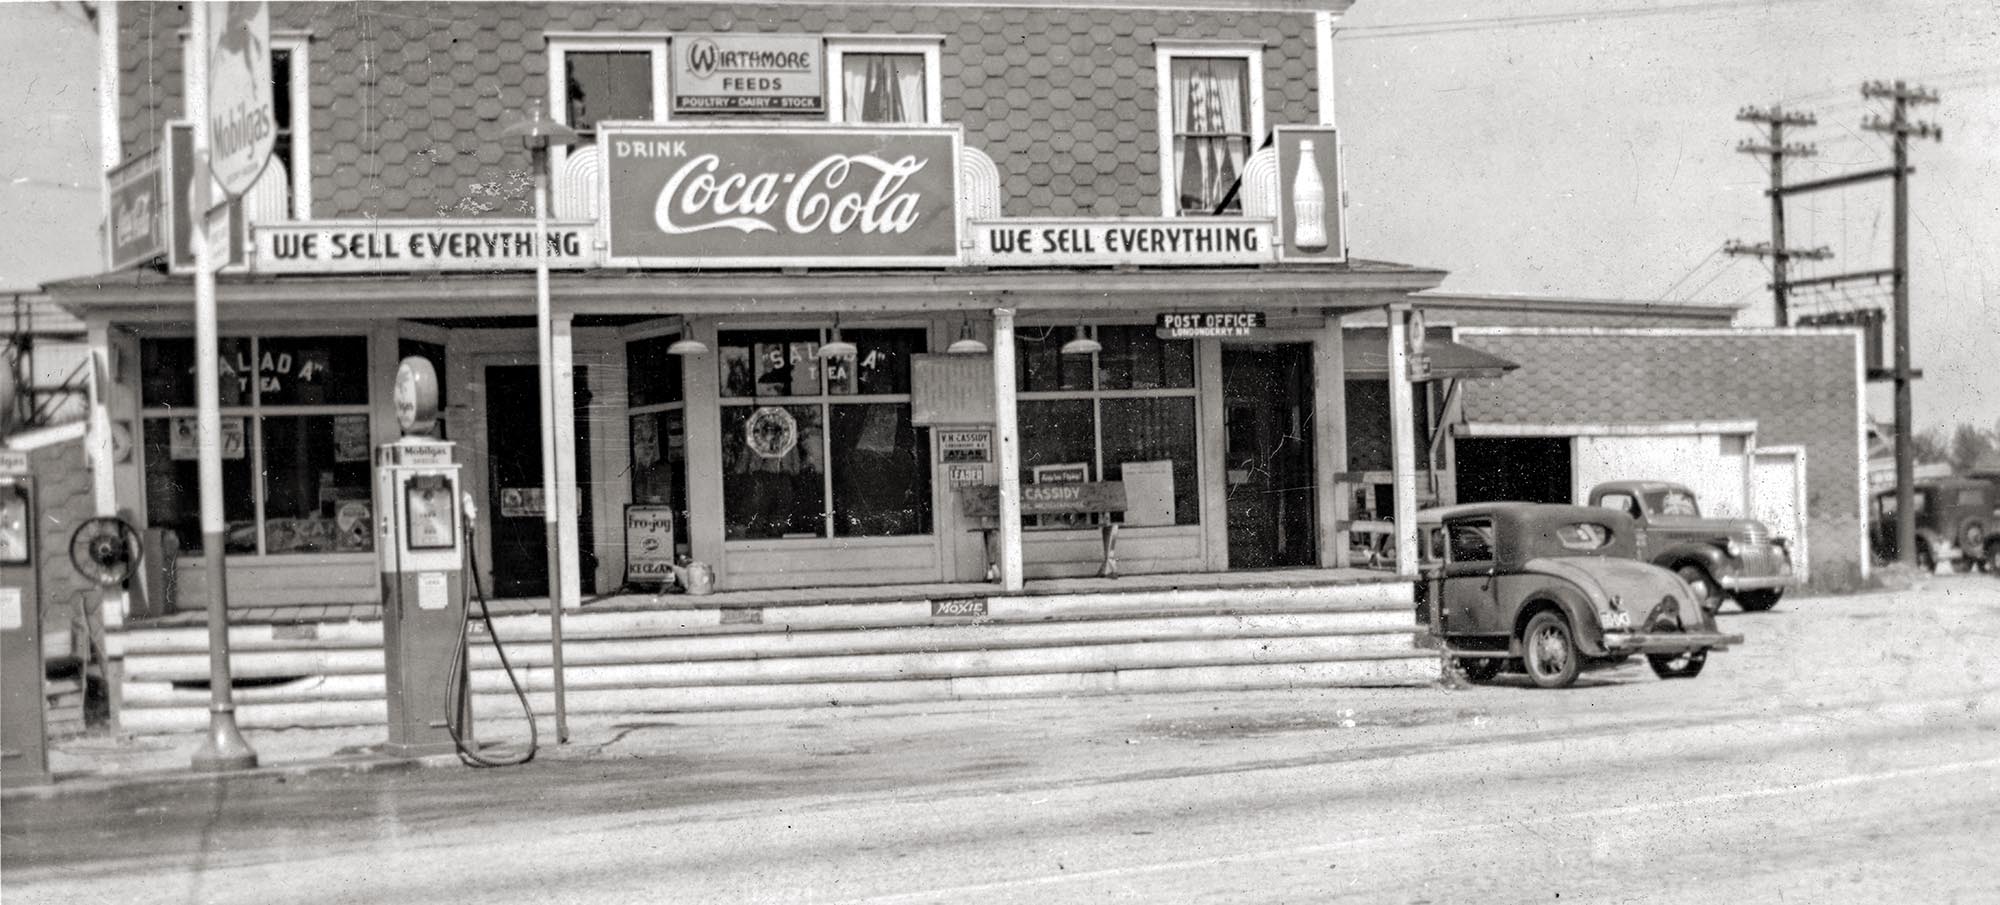 Wirthmore Feeds, Post Office and General Store,Londonderry, New Hampshire, mid-1940s.

Found in an archives collection of Peoria, Illinois area World War I and II military pictures, obtained by Jr Owens, of JRs Mini Mall Vintage Store in Pekin, Illinois.